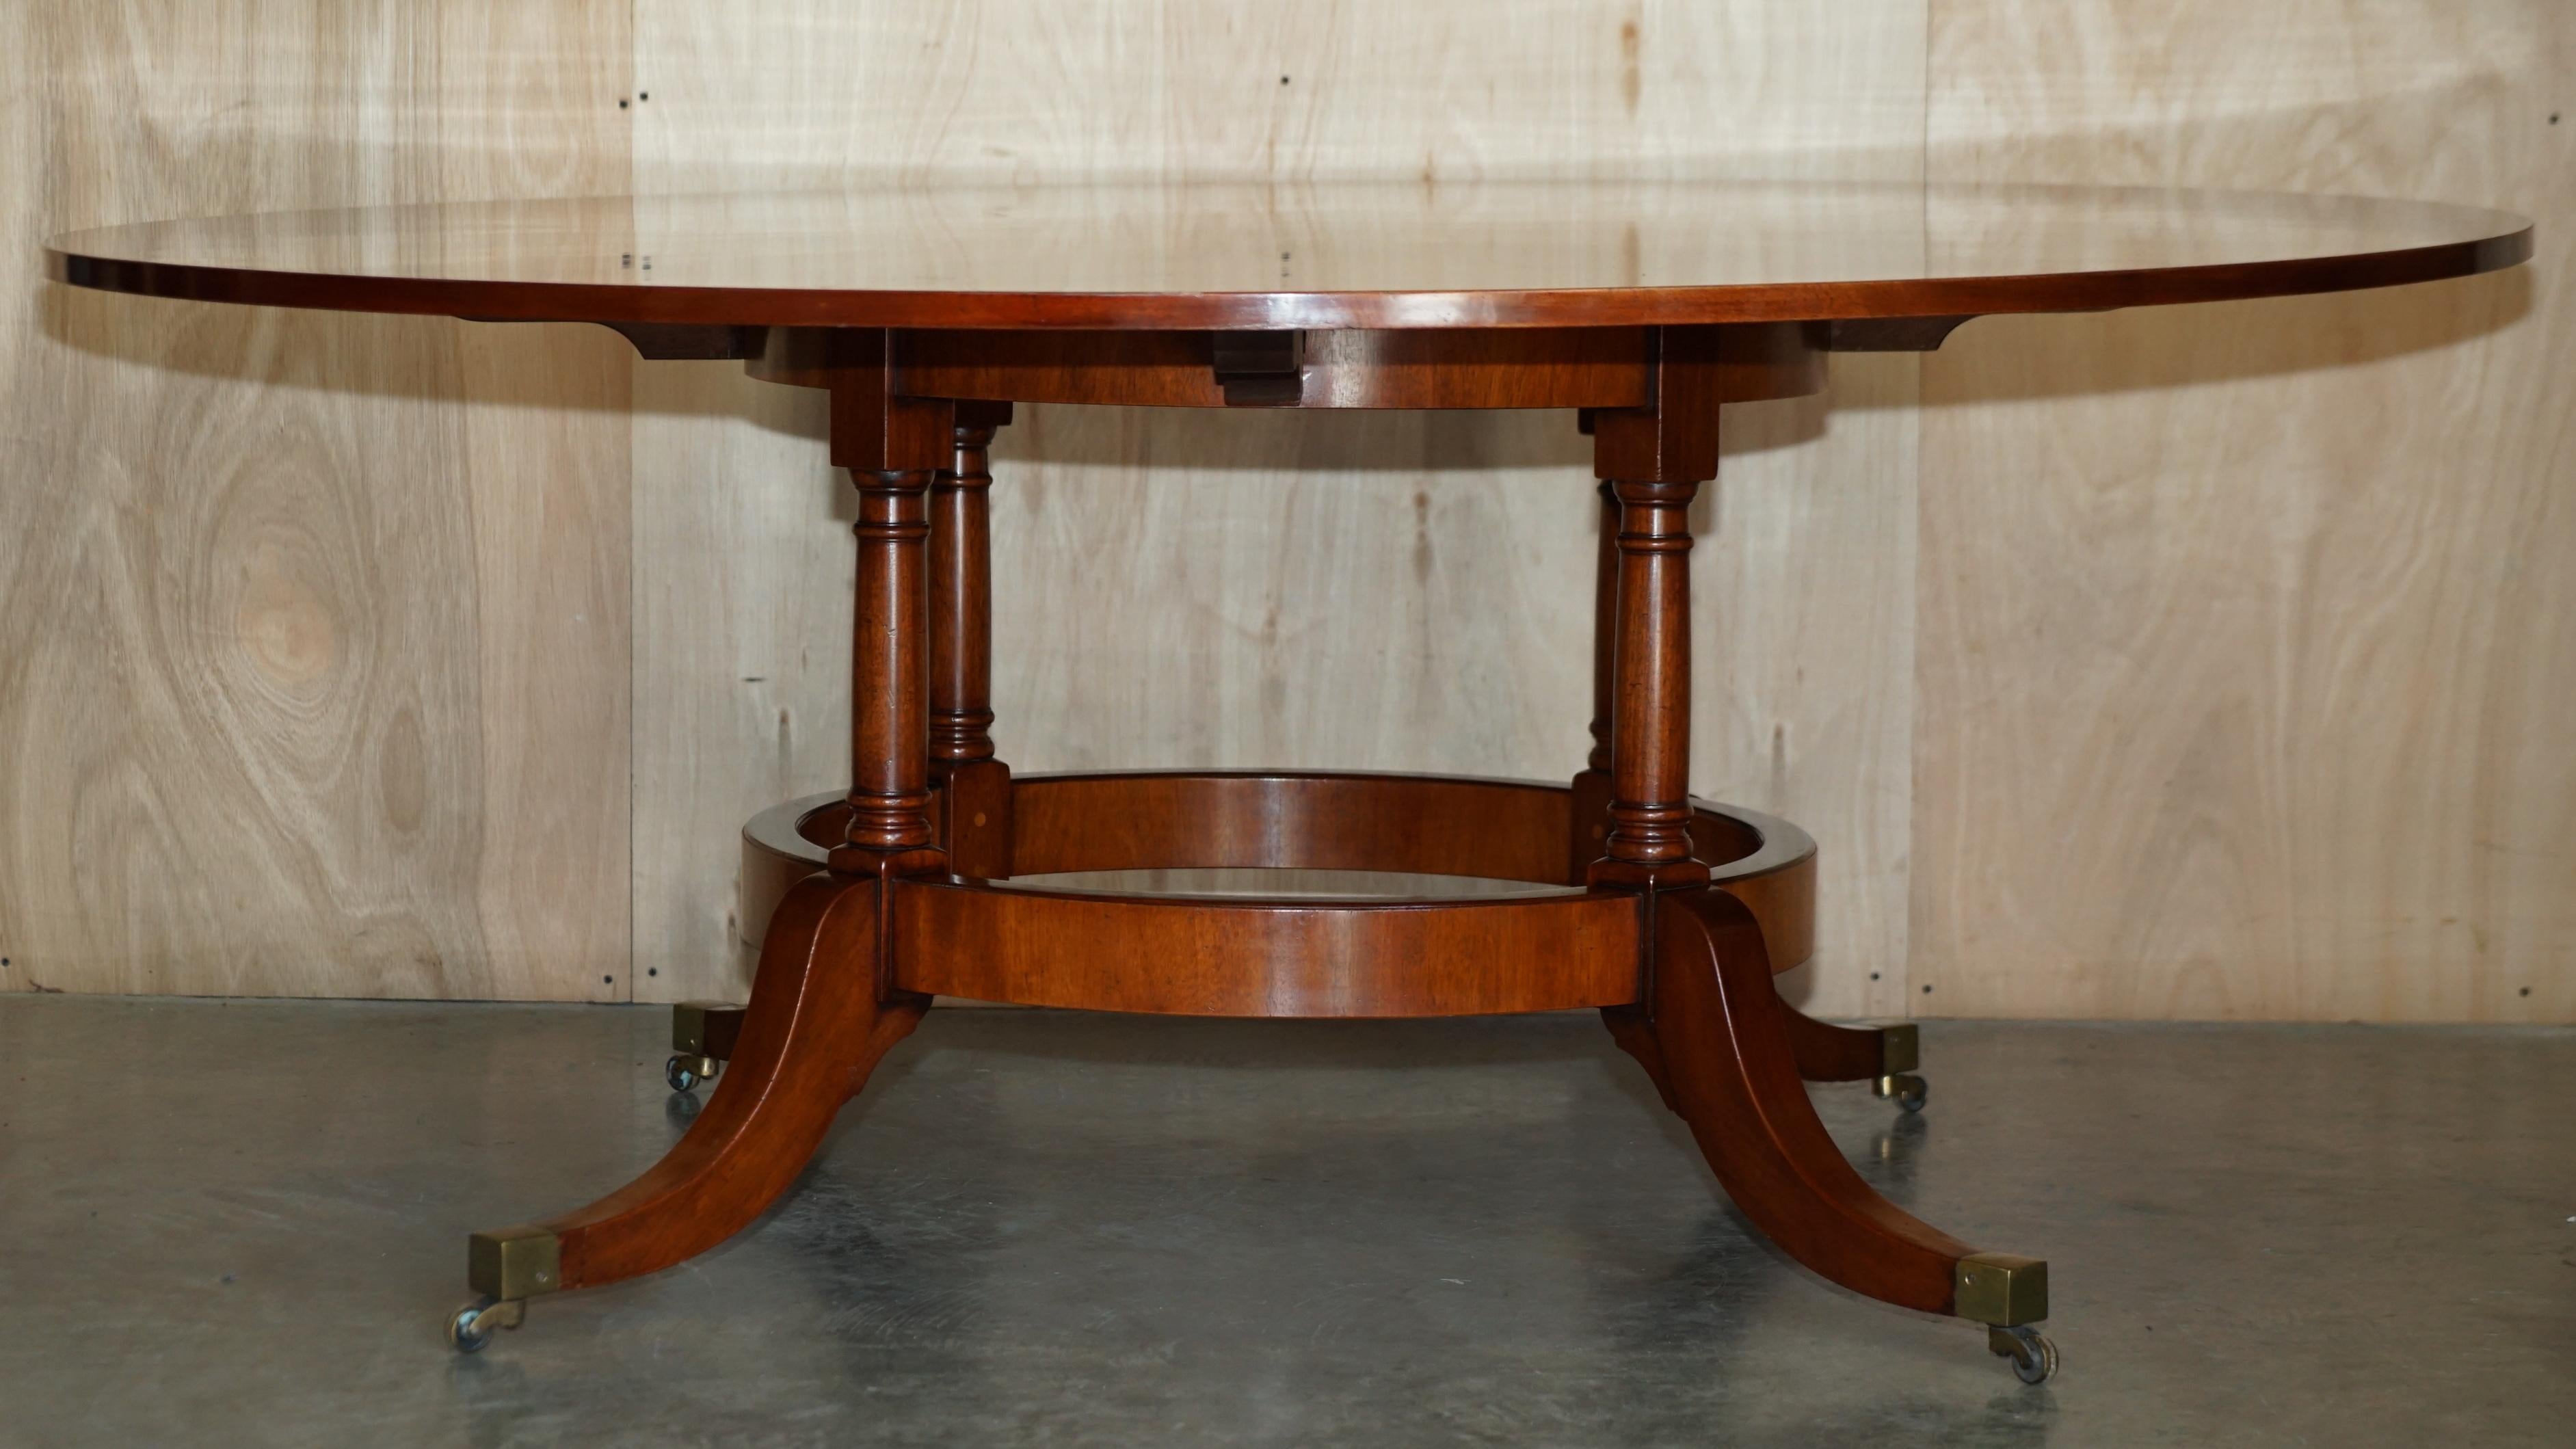 Art Deco Stunning Burr Yew Wood & Walnut Large Round Dining Seats 8 People Nicely